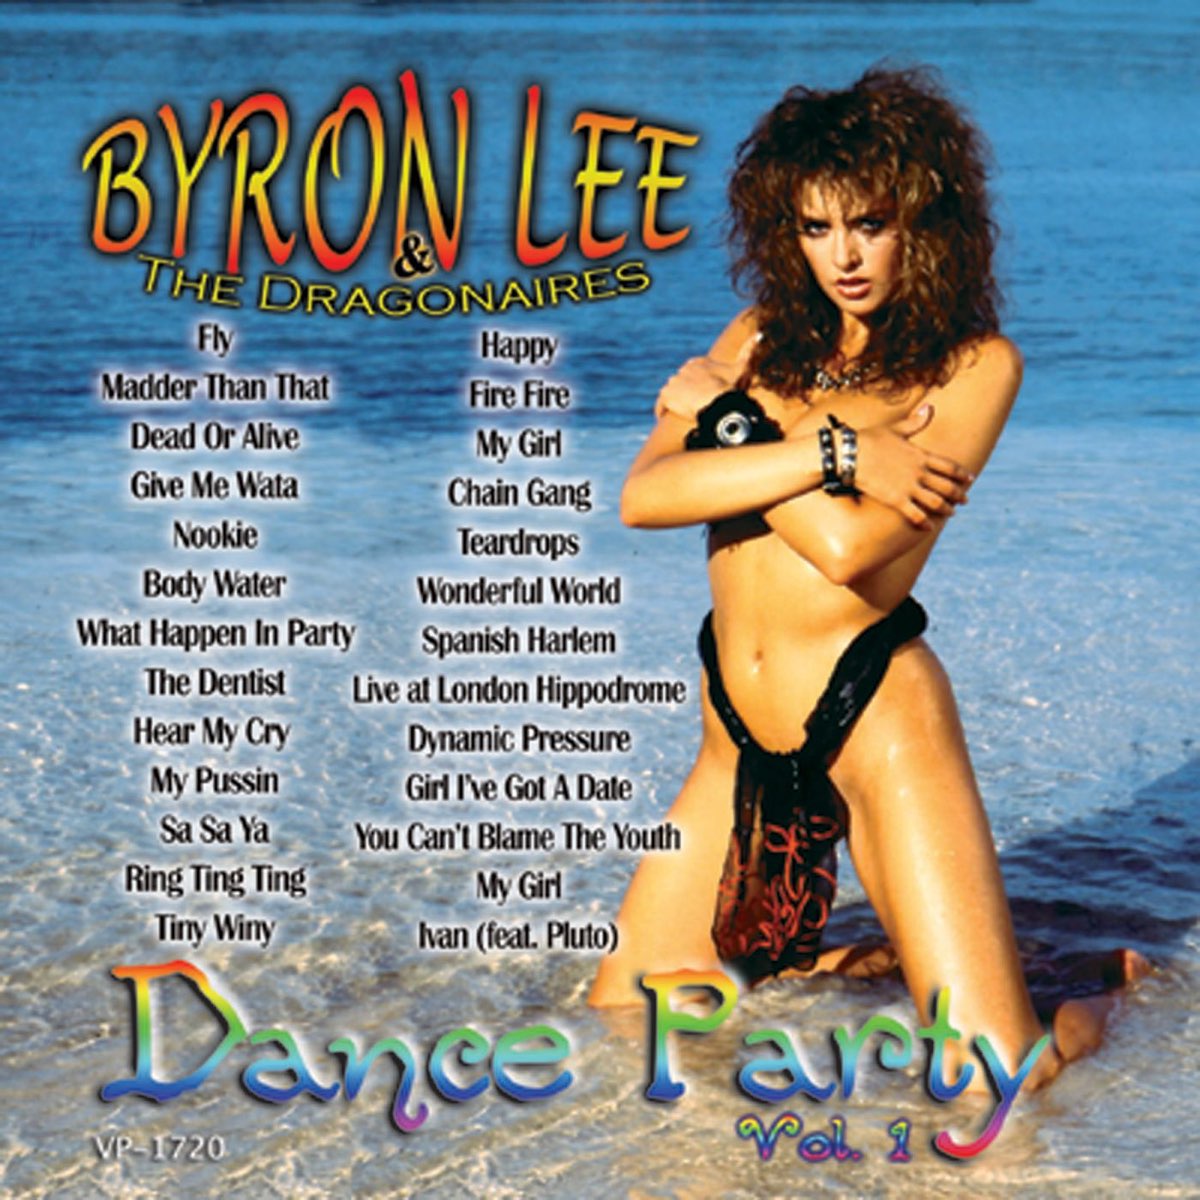 Dance Party, Vol. 1 by Byron Lee & The Dragonaires on Apple Music